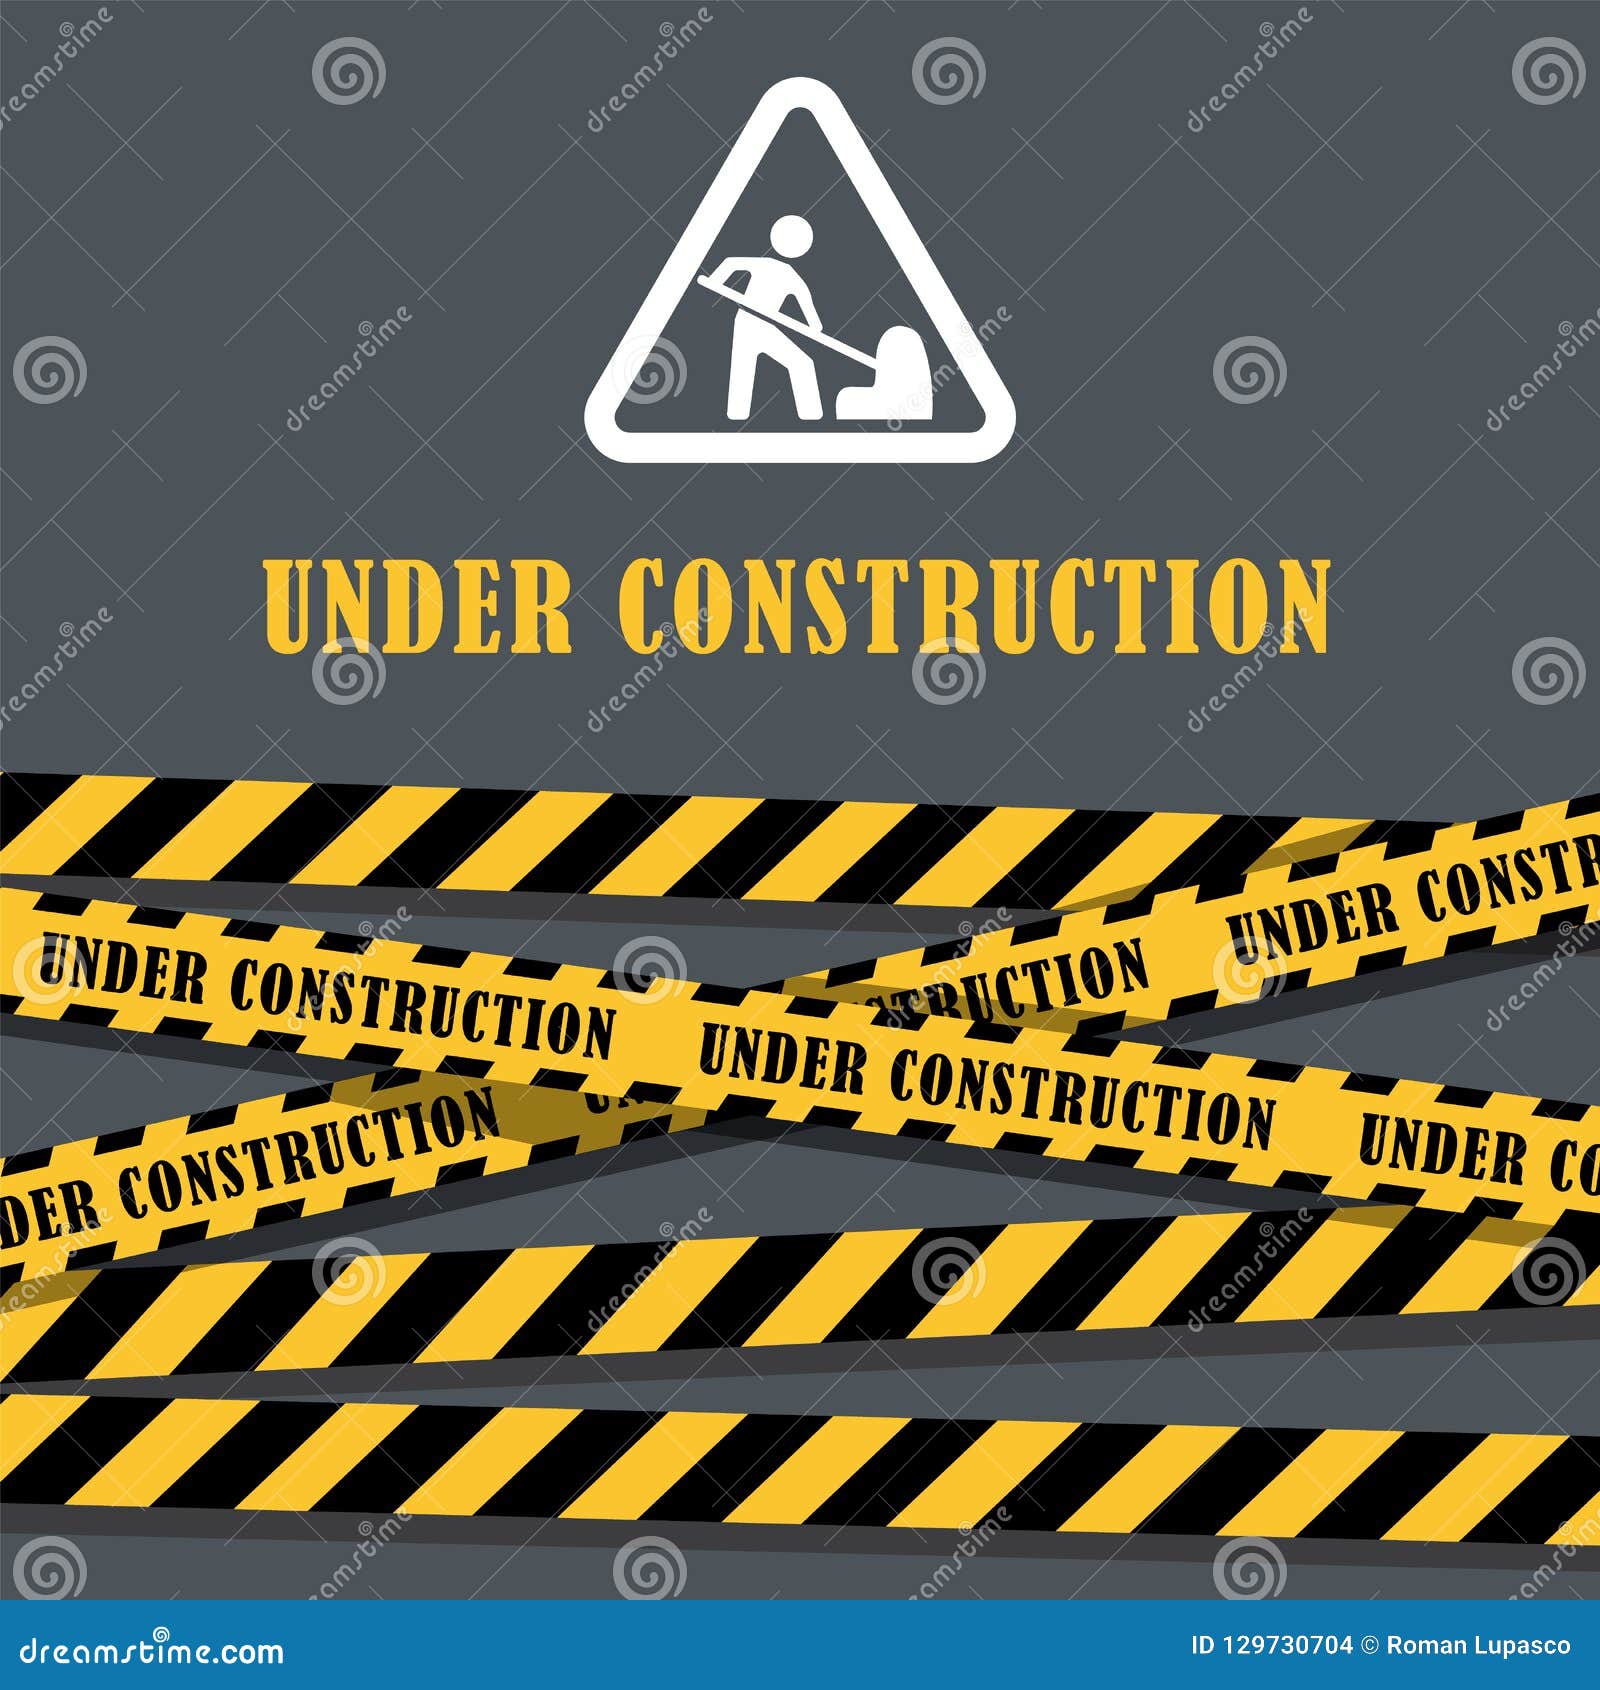 Under Construction Website Page with Black and Yellow Striped Borders ...